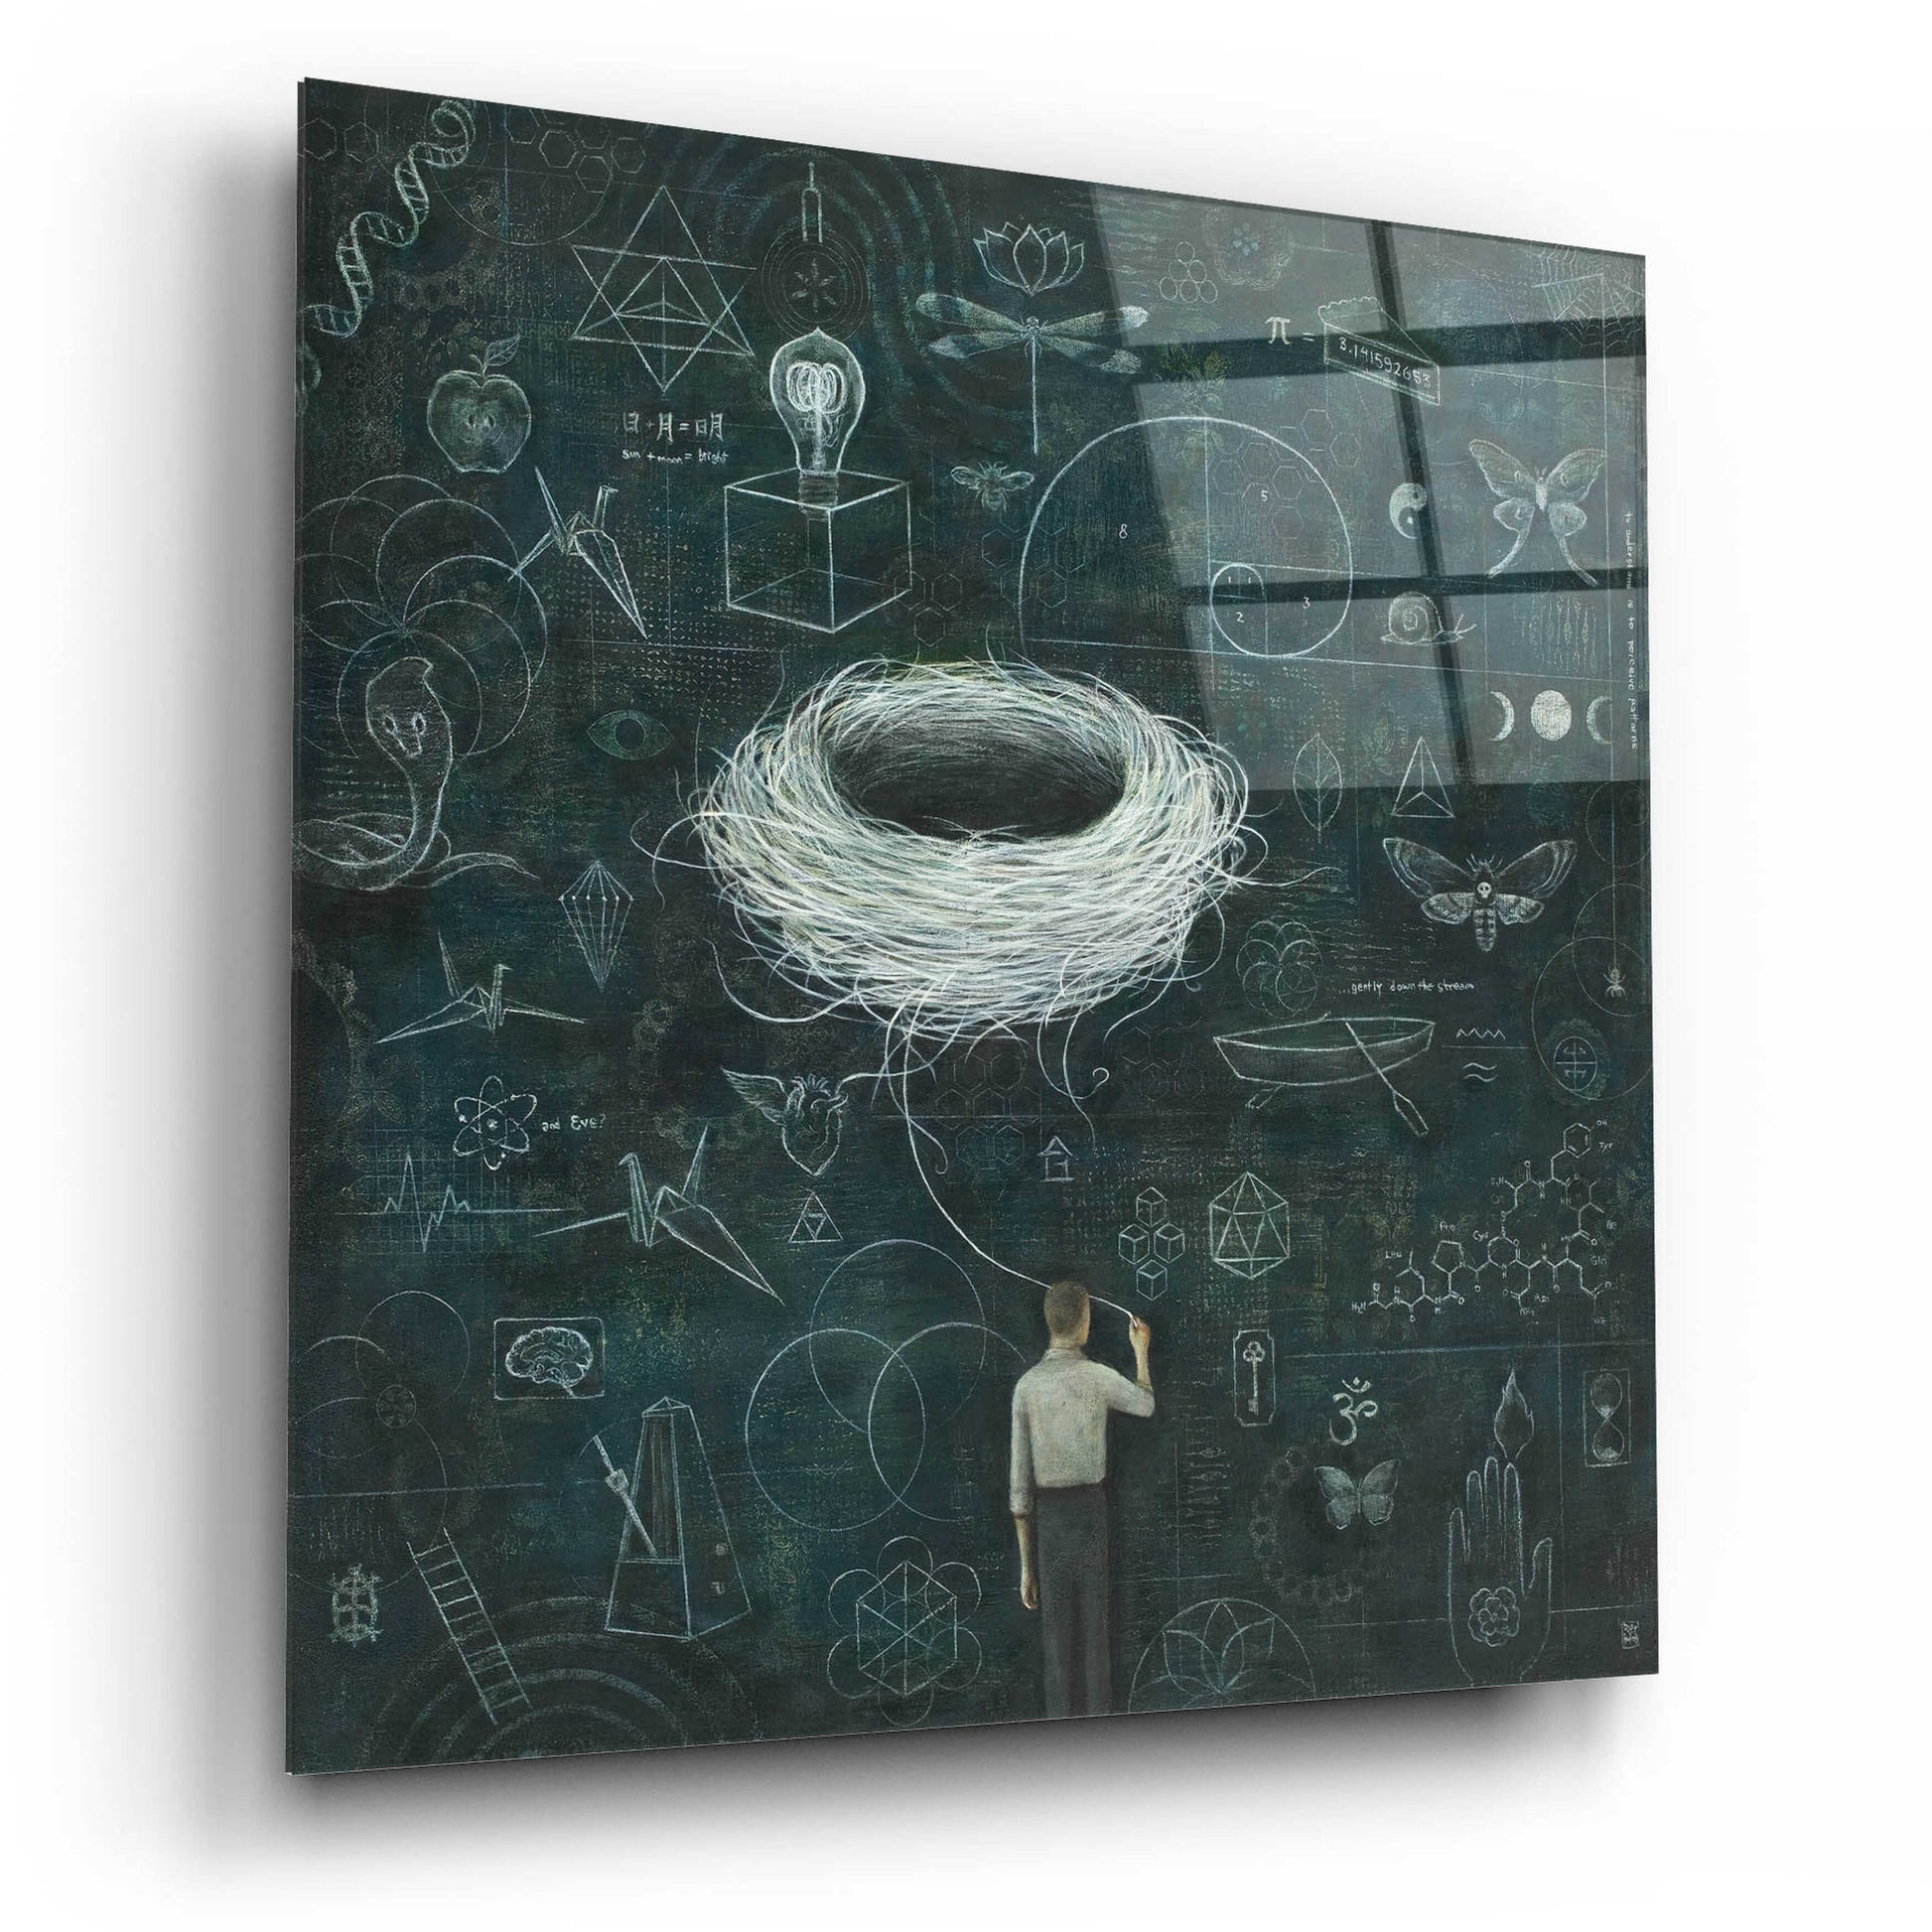 Epic Art 'Drafting Drifting ConsciousNest' by Duy Huynh, Acrylic Glass Wall Art,12x12